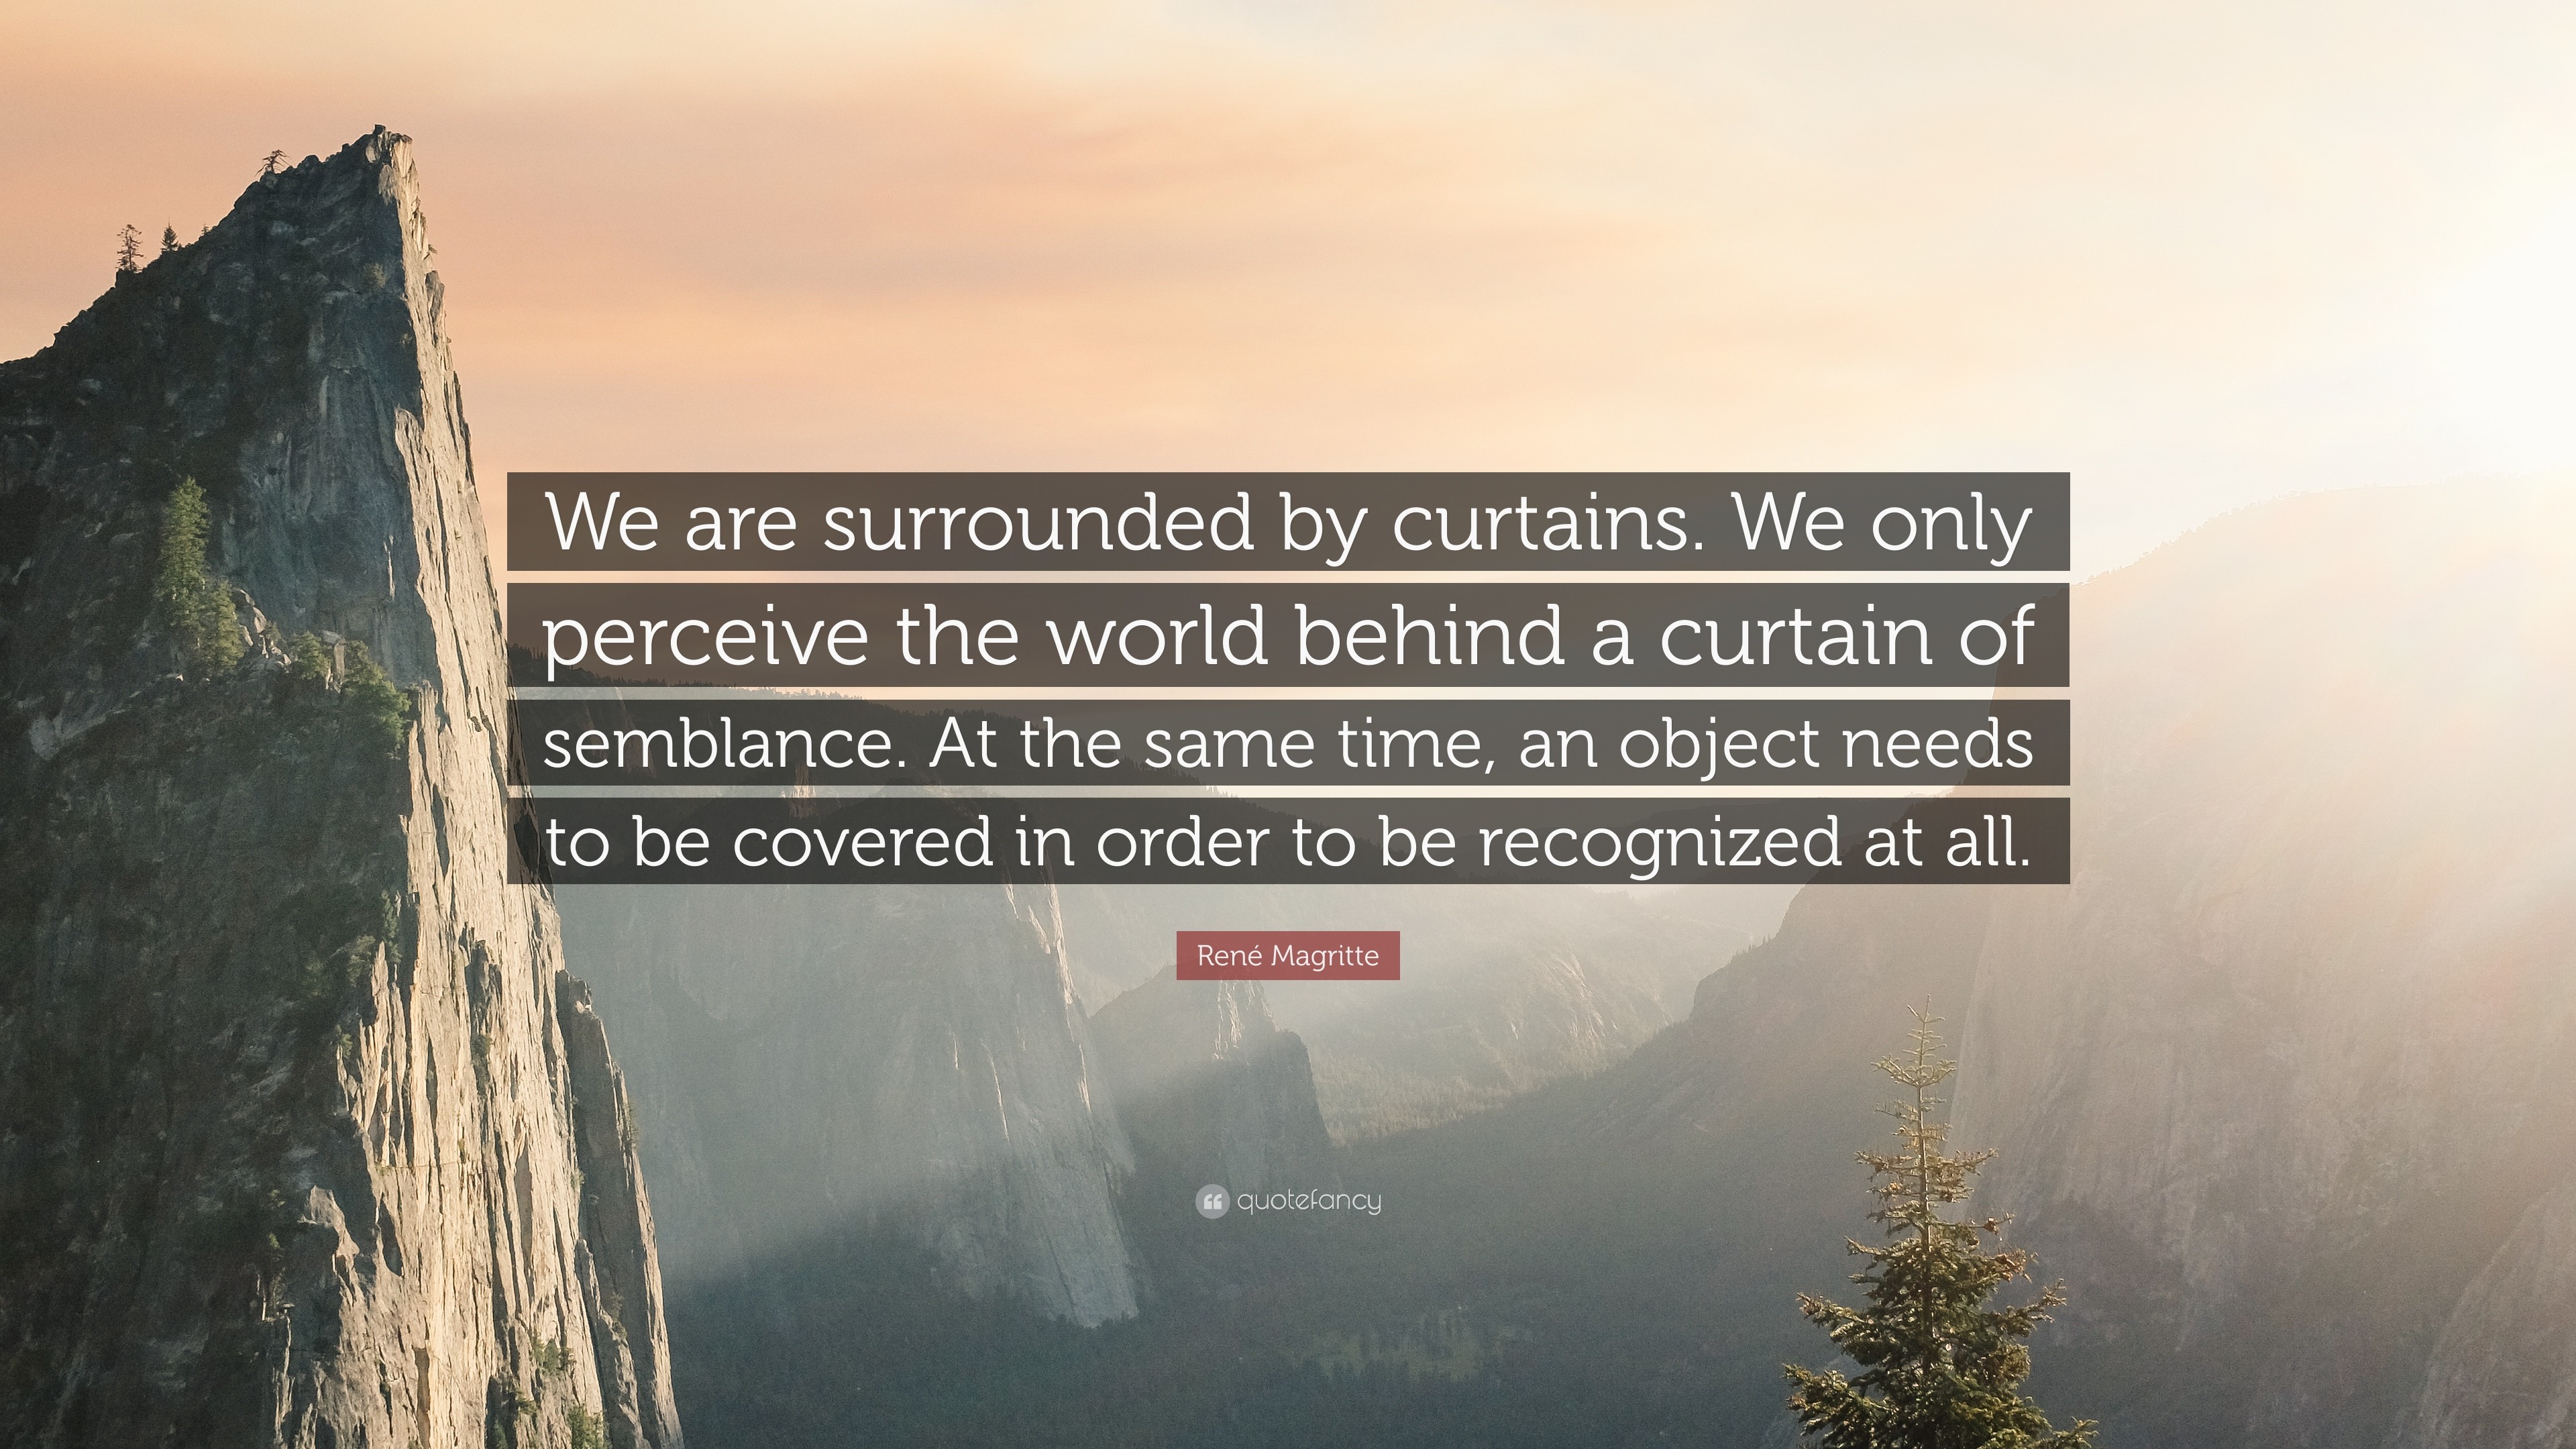 3840x2160 RenÃ© Magritte Quote: “We are surrounded by curtains. We only perceive the  world